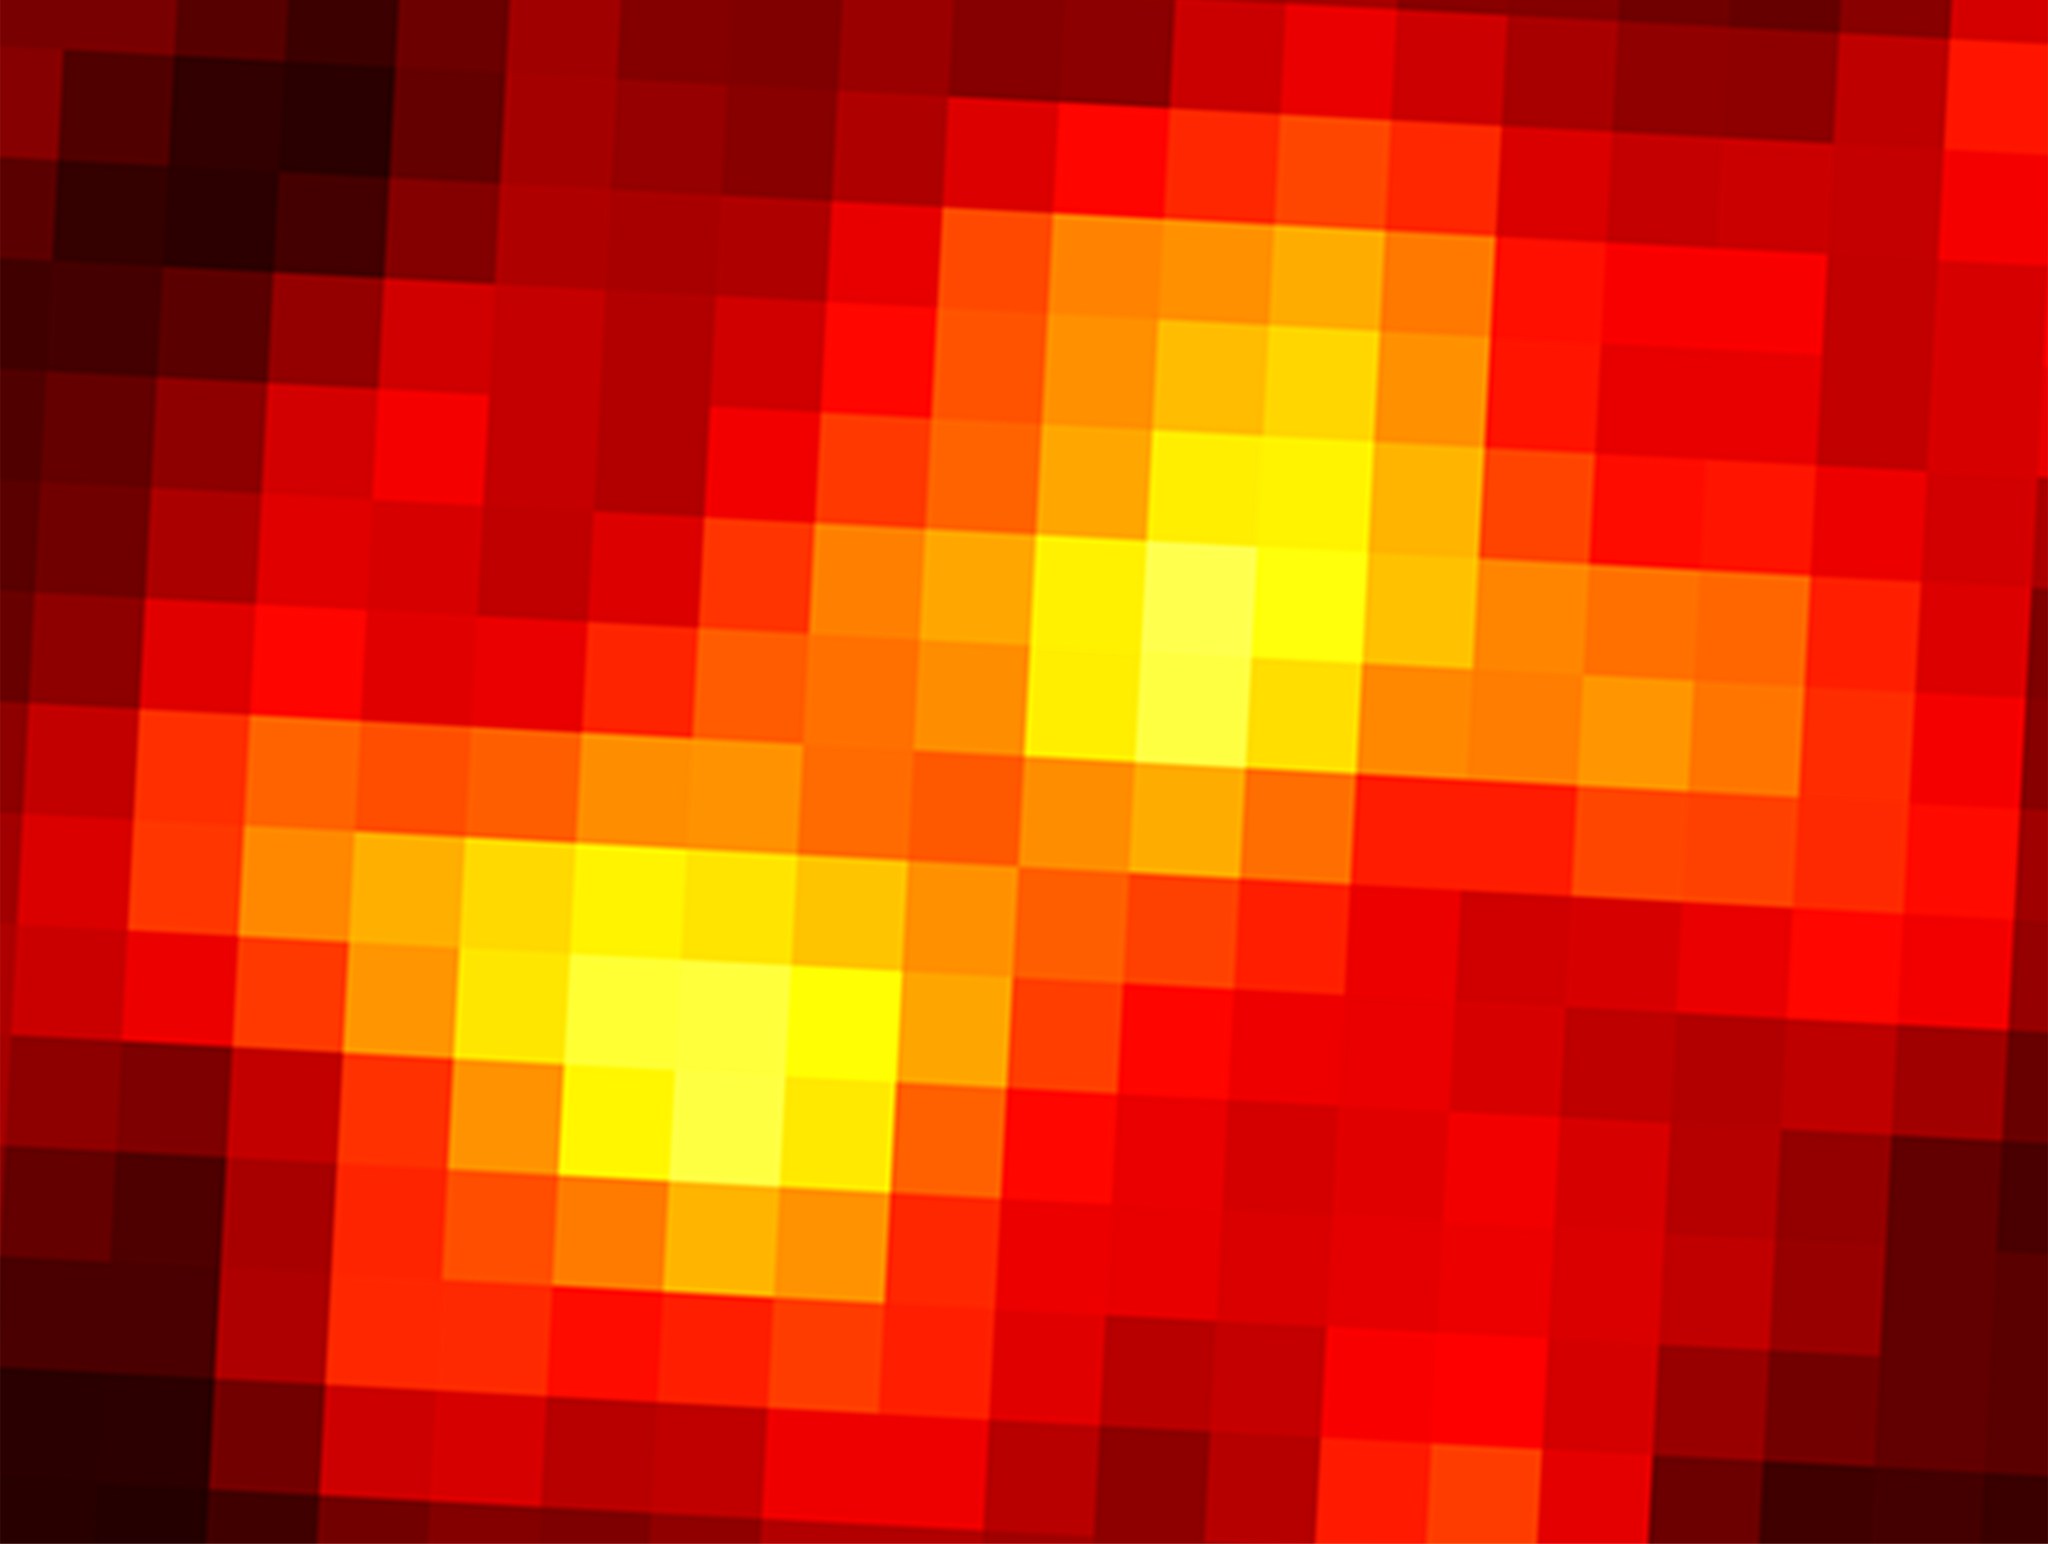 A gamma-ray view of the same region shown above in visible wavelengths.